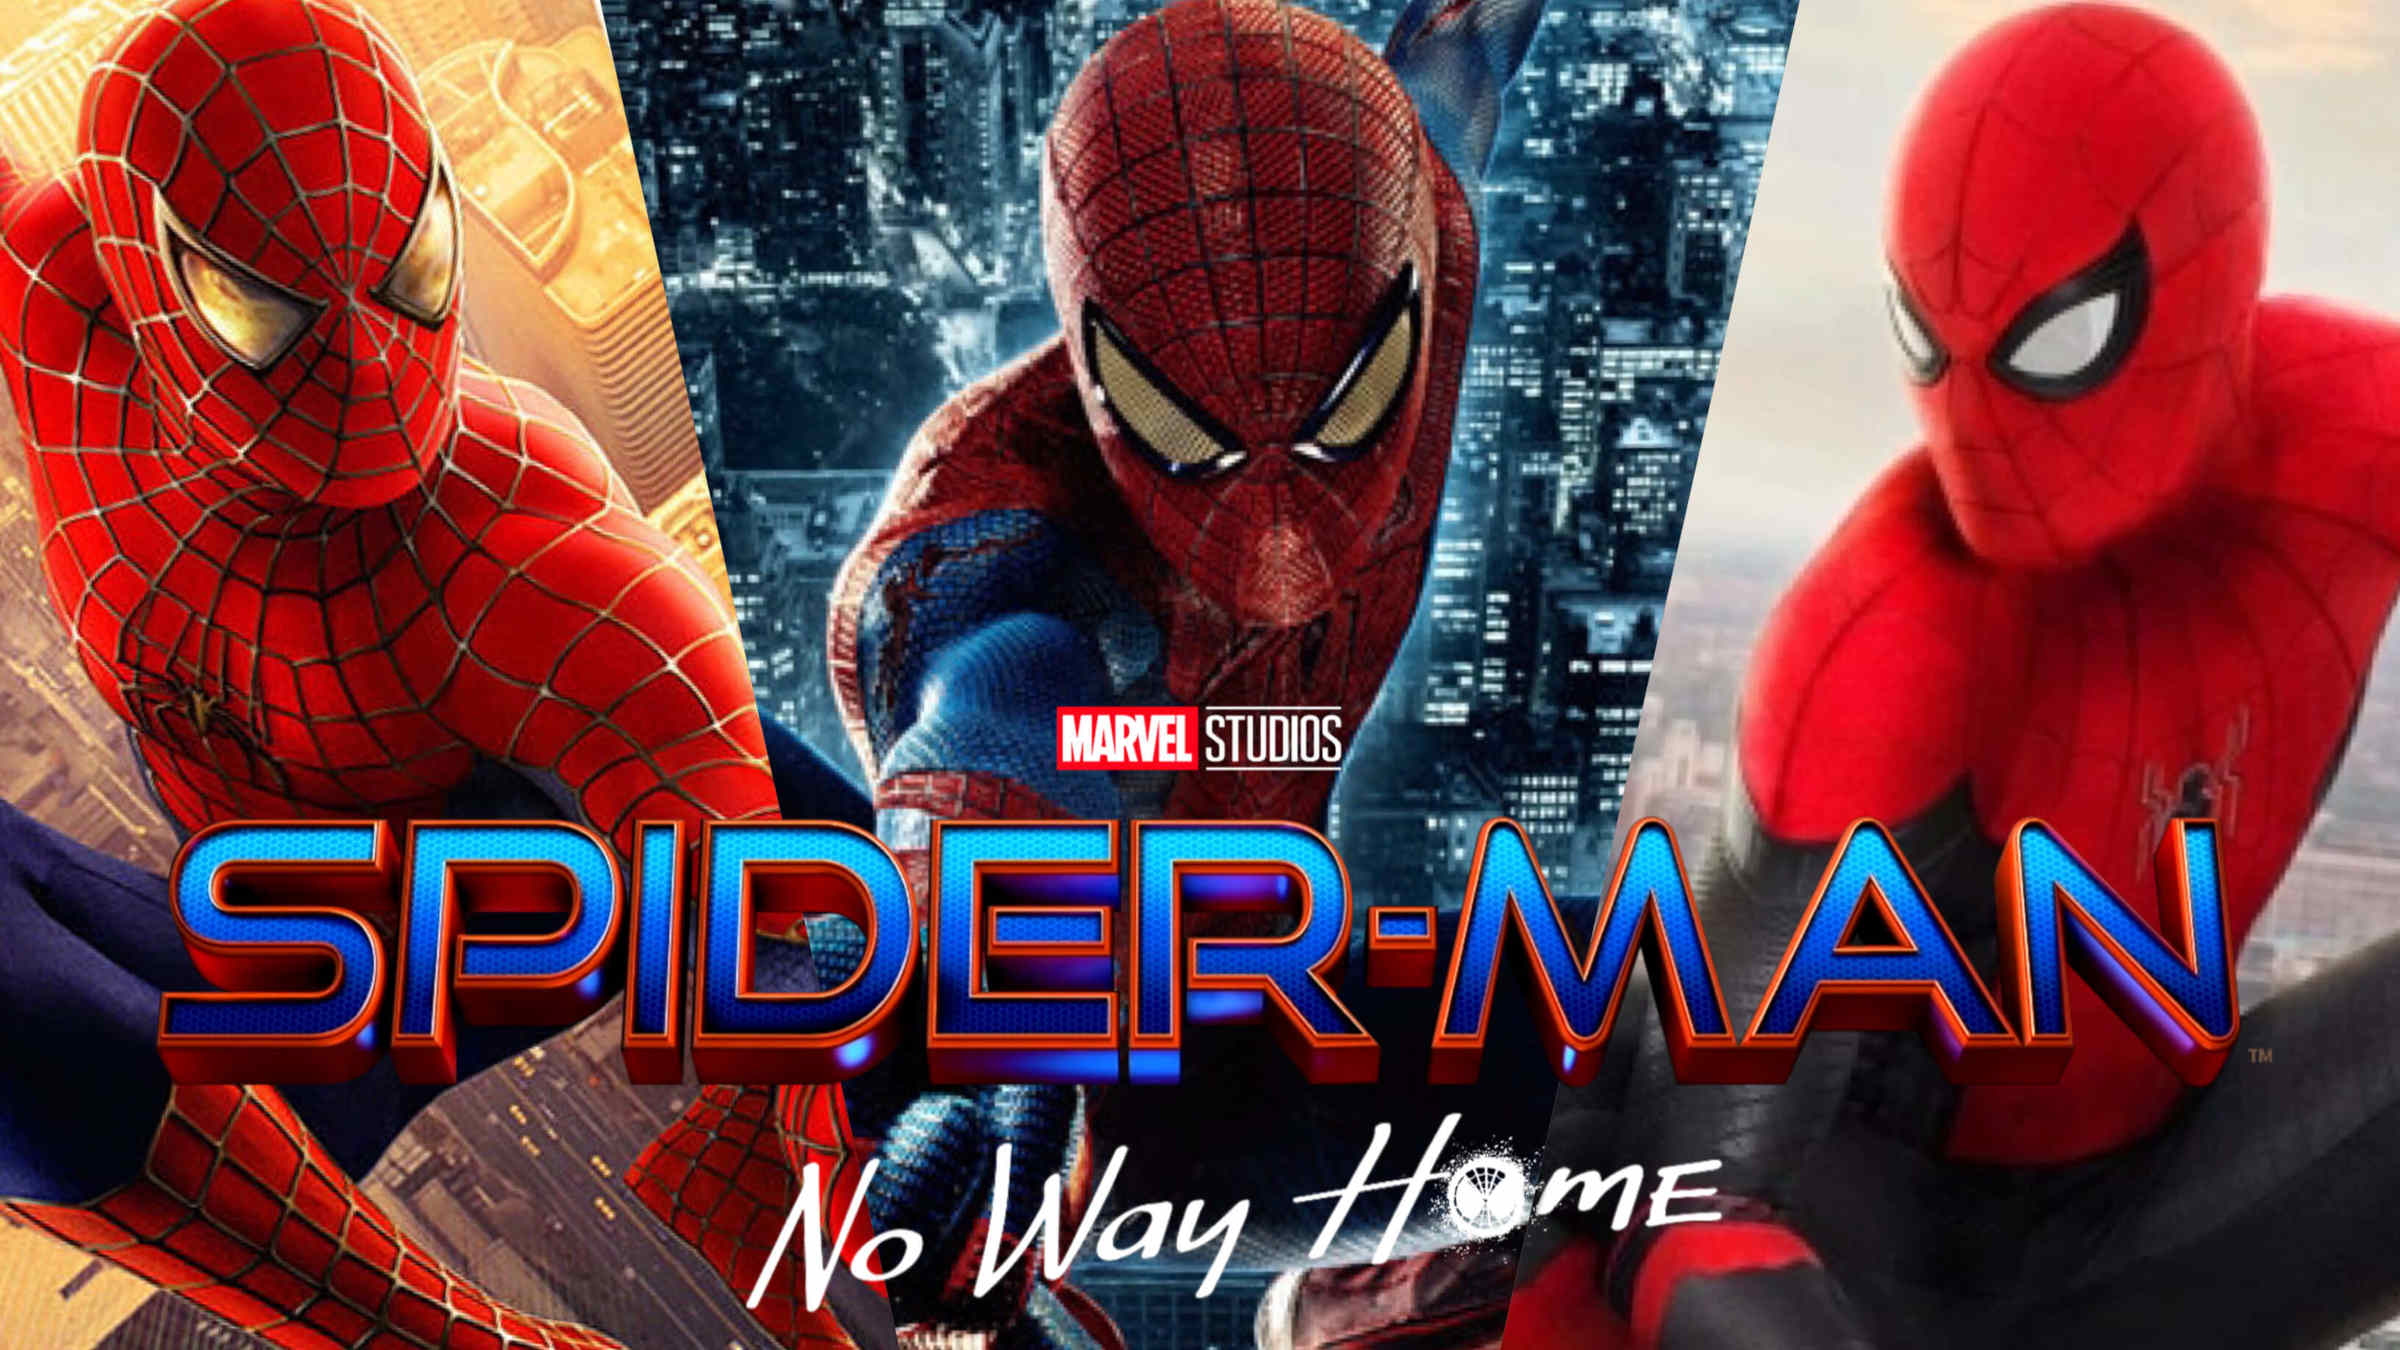 Here's how you can swing into the multiverse and watch 'Spider-Man: No Way Home' for free online from the comfort of your living room!